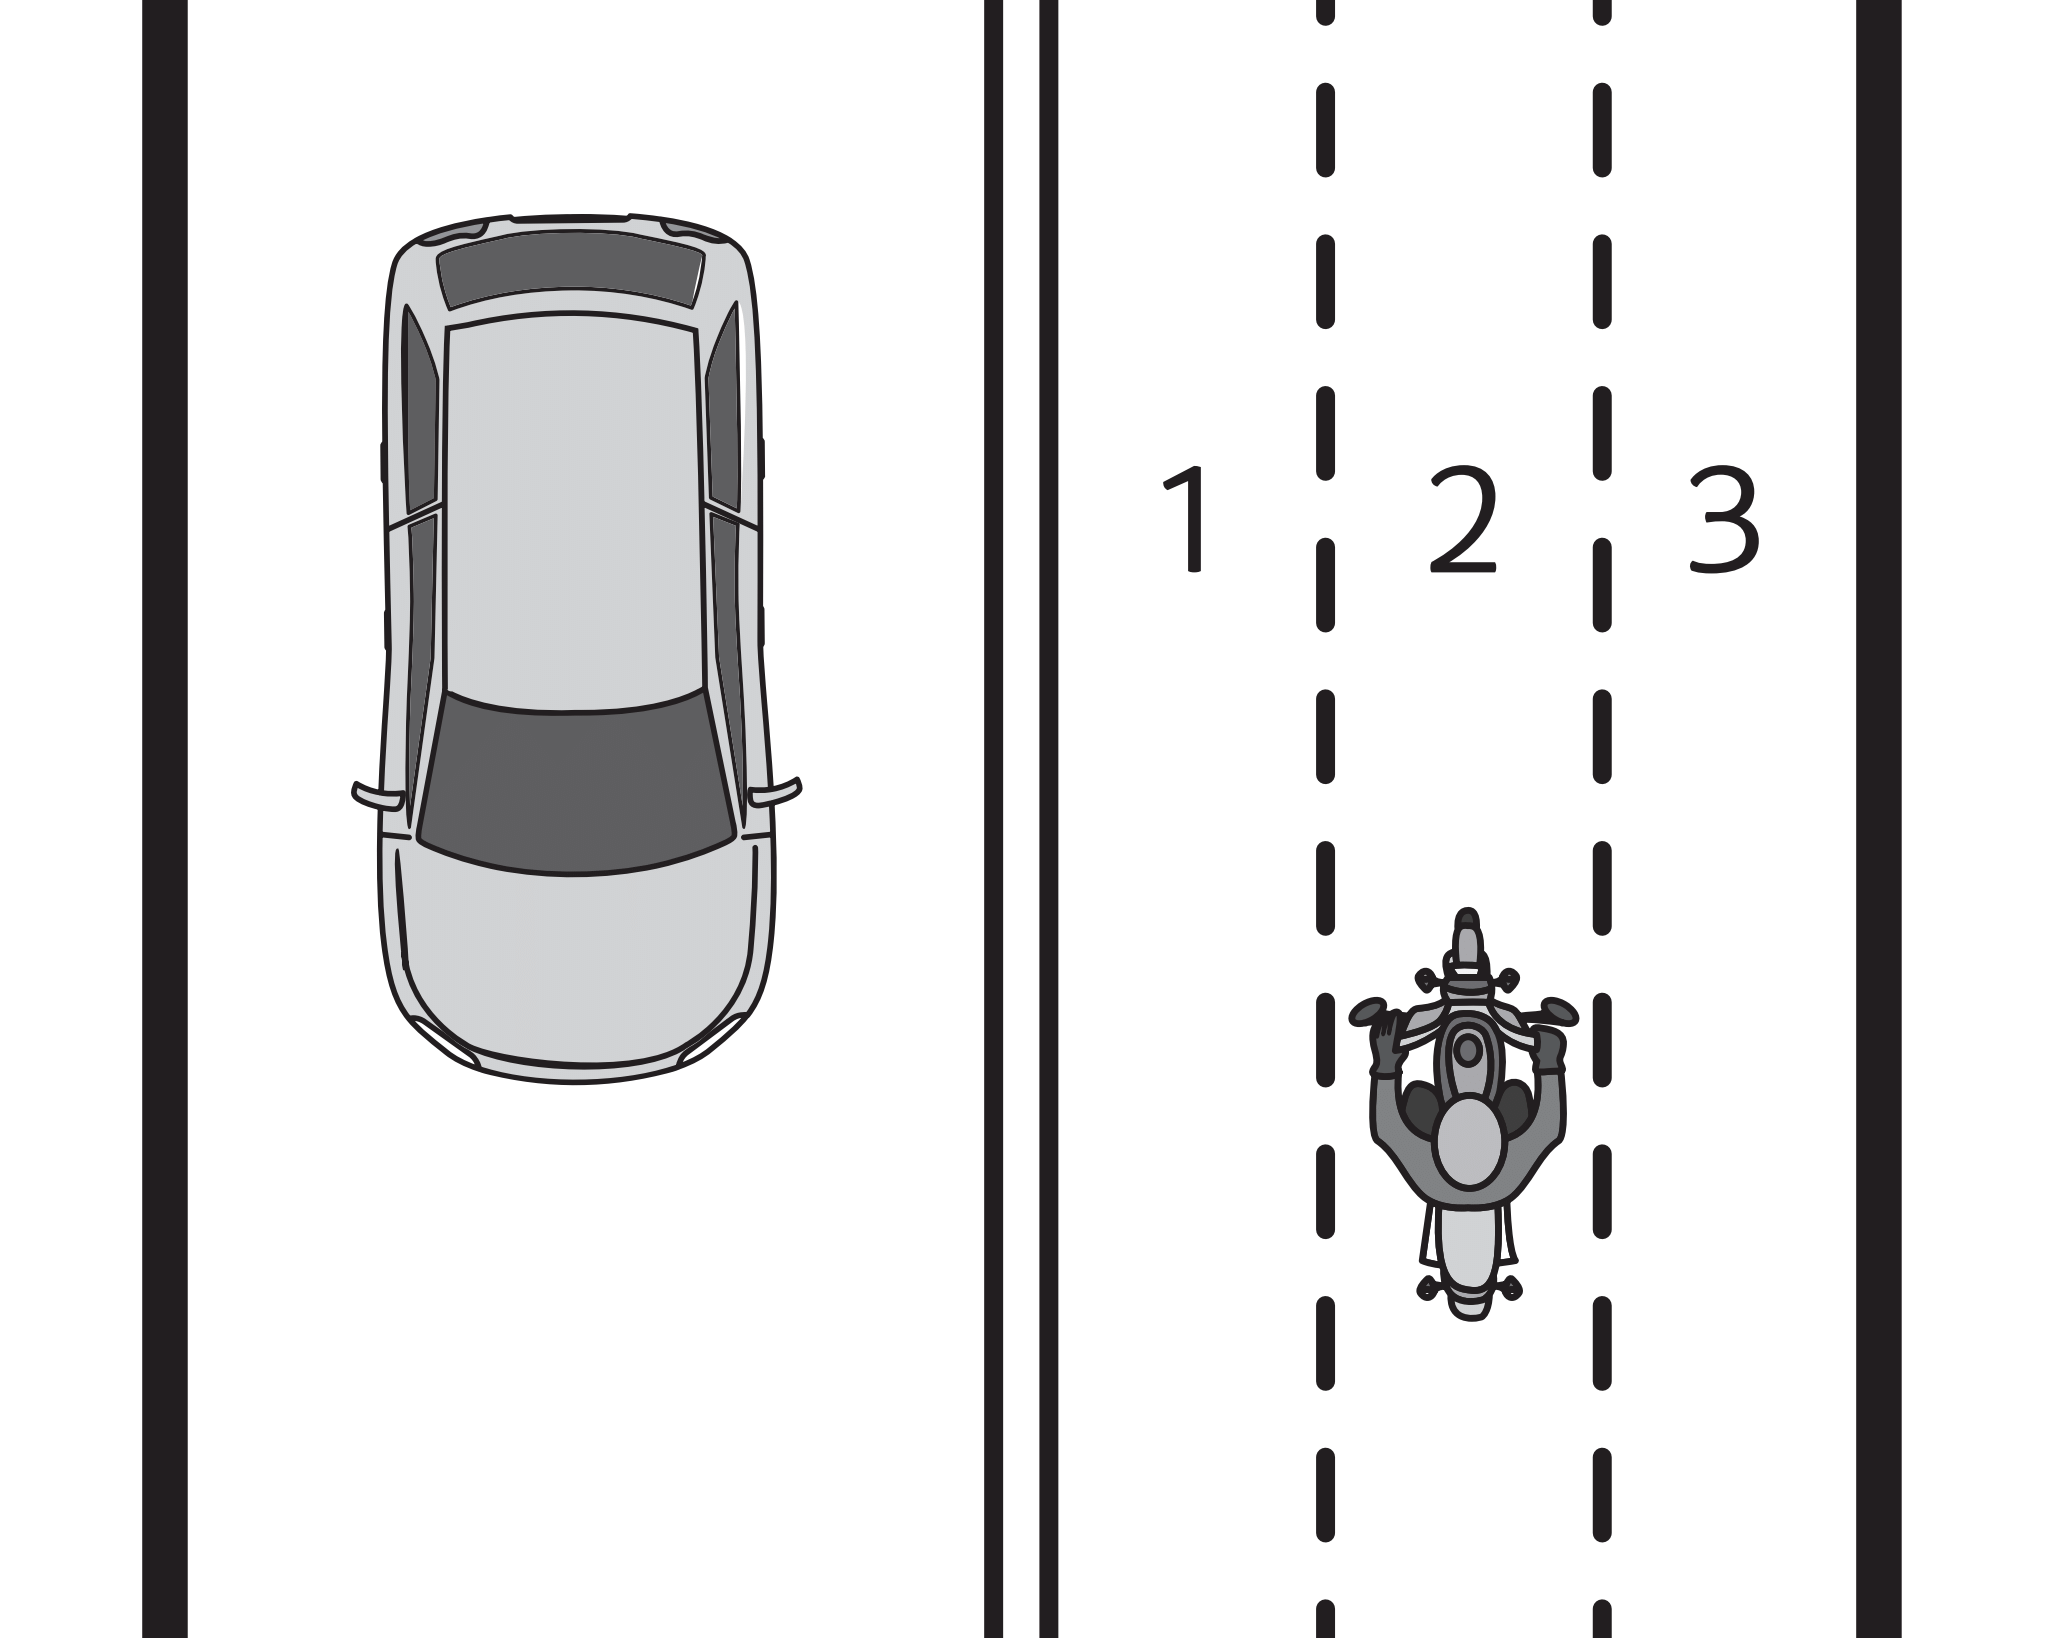 image of lane positions on a motorcycle